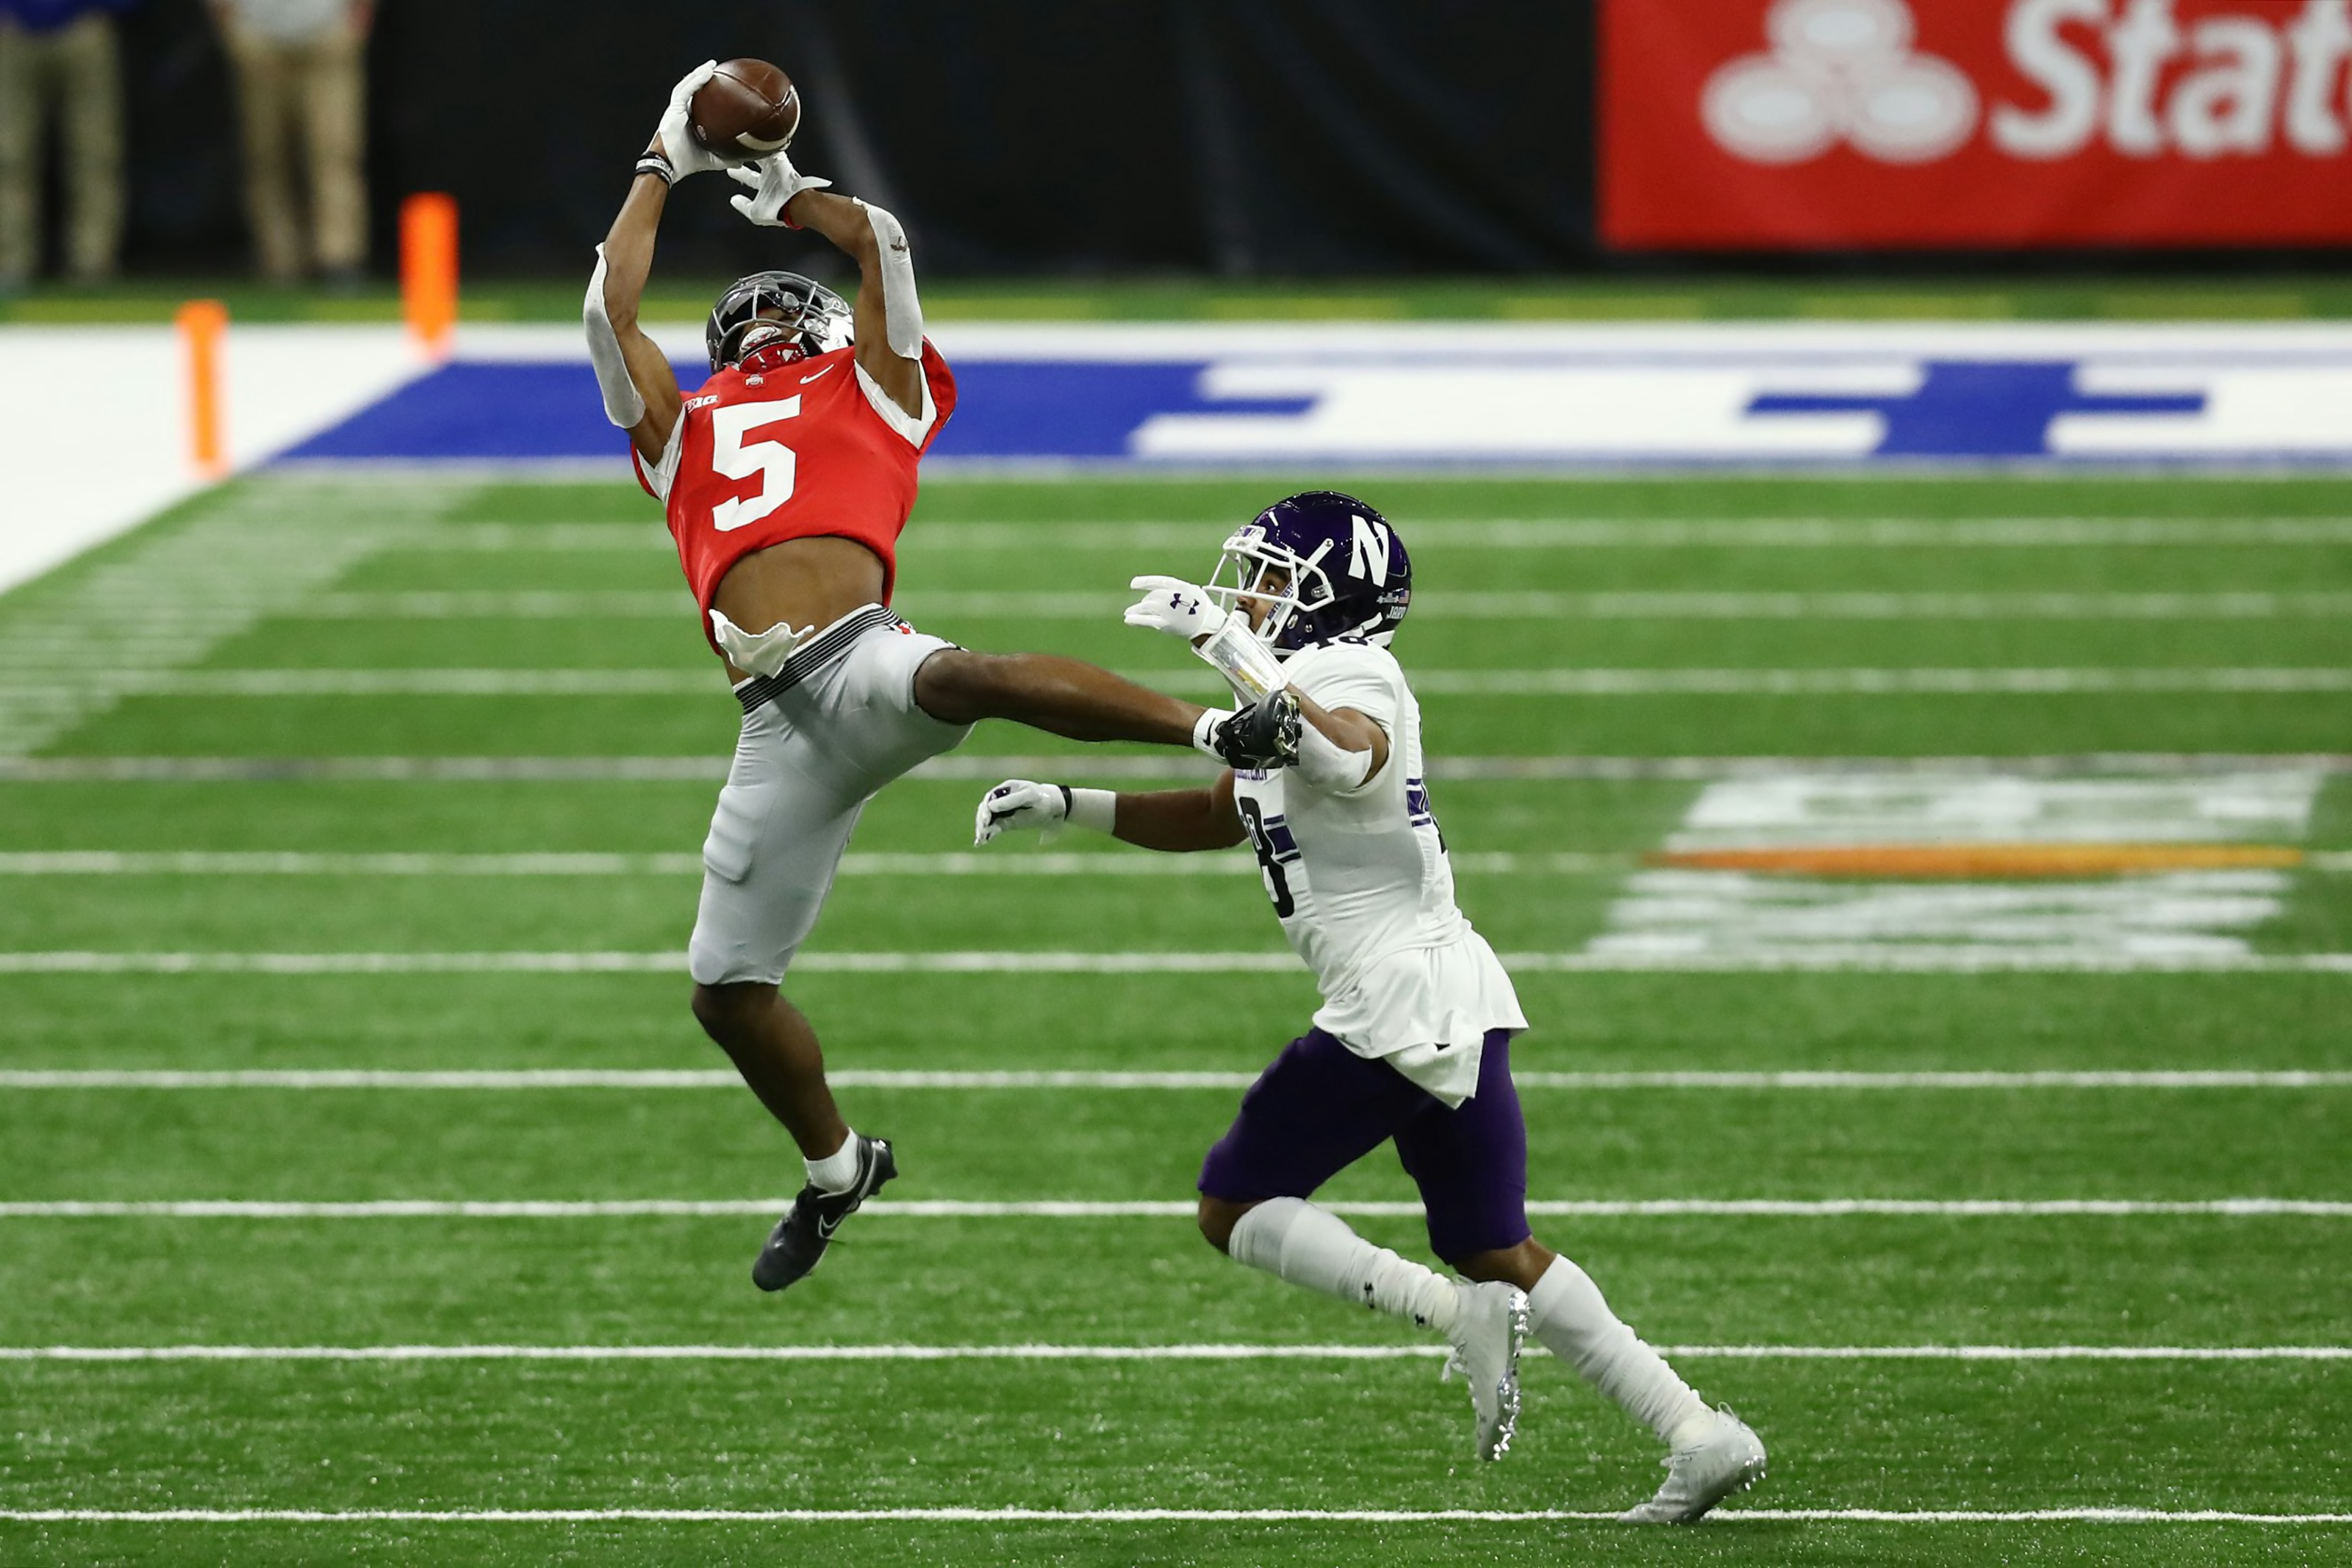 2022 NFL Draft notebook Ohio State’s dynamic duo and more